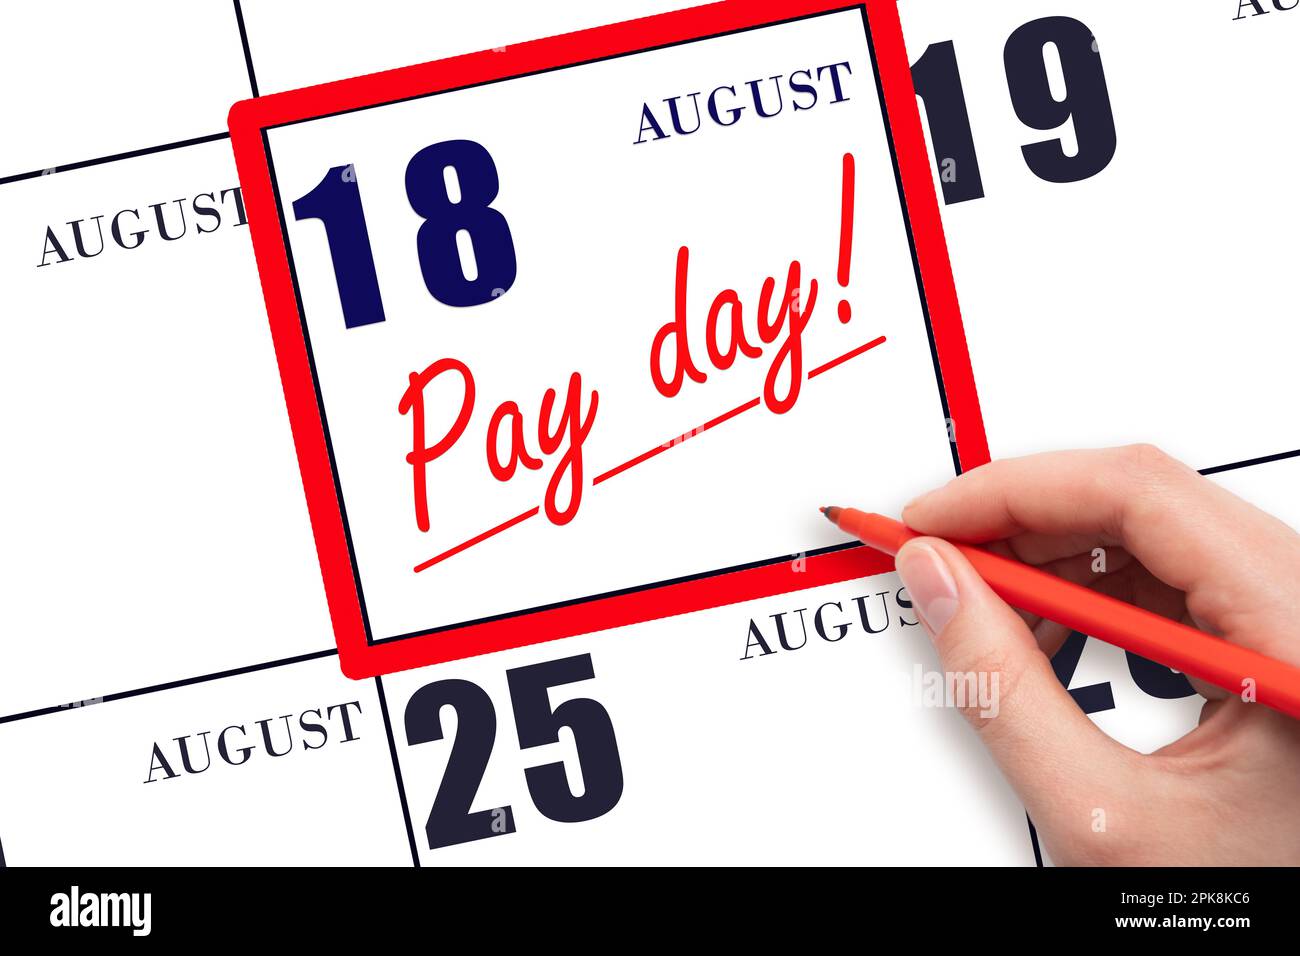 18th day of August. Hand writing text PAY DATE on calendar date August 18 and underline it. Payment due date. Reminder concept of payment. Summer mont Stock Photo